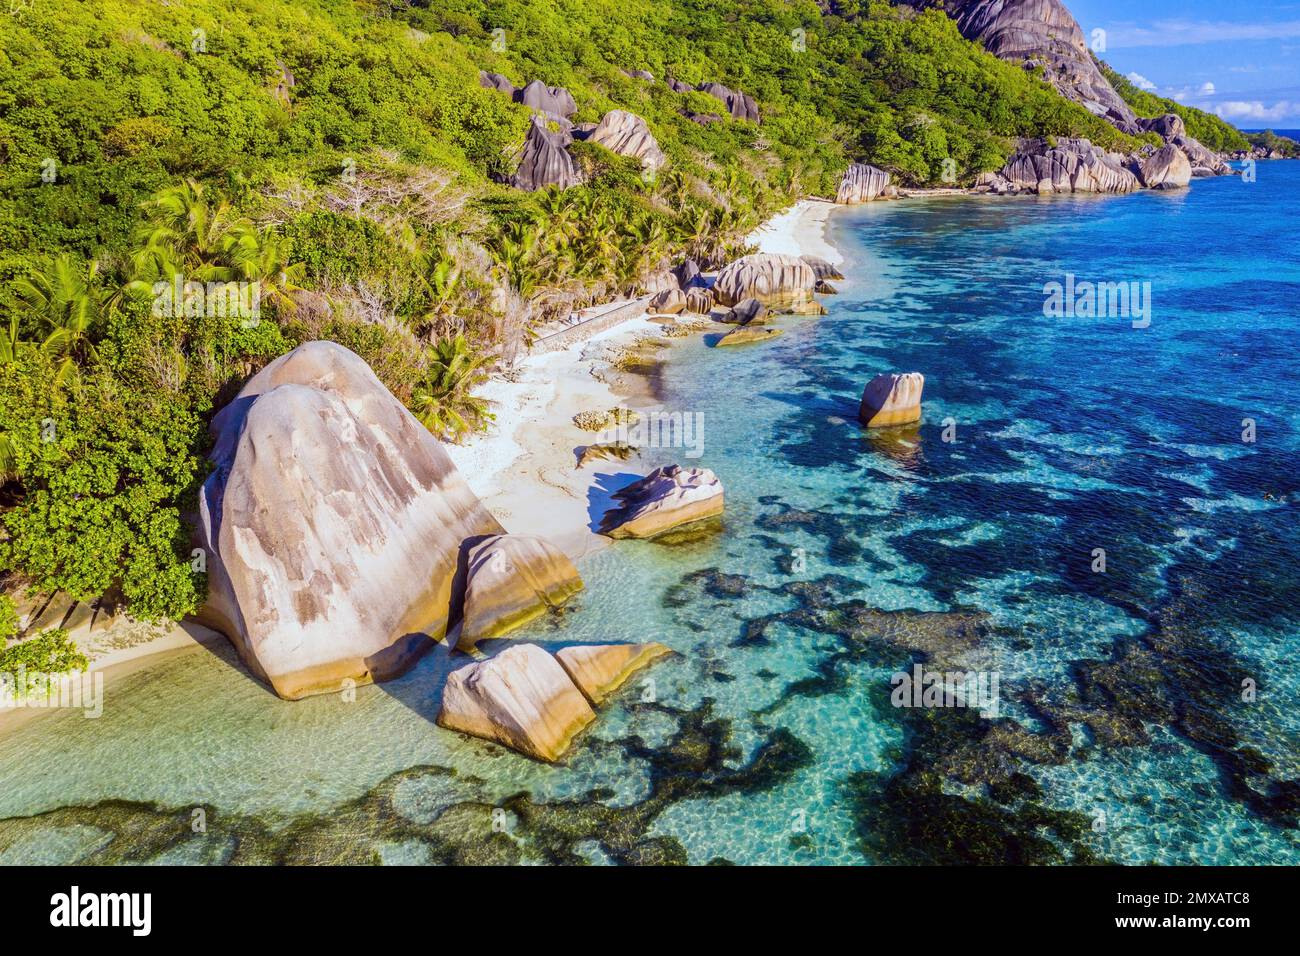 Aerial view of Anse Source d'Argent beach in La Digue, Seychelles Stock Photo